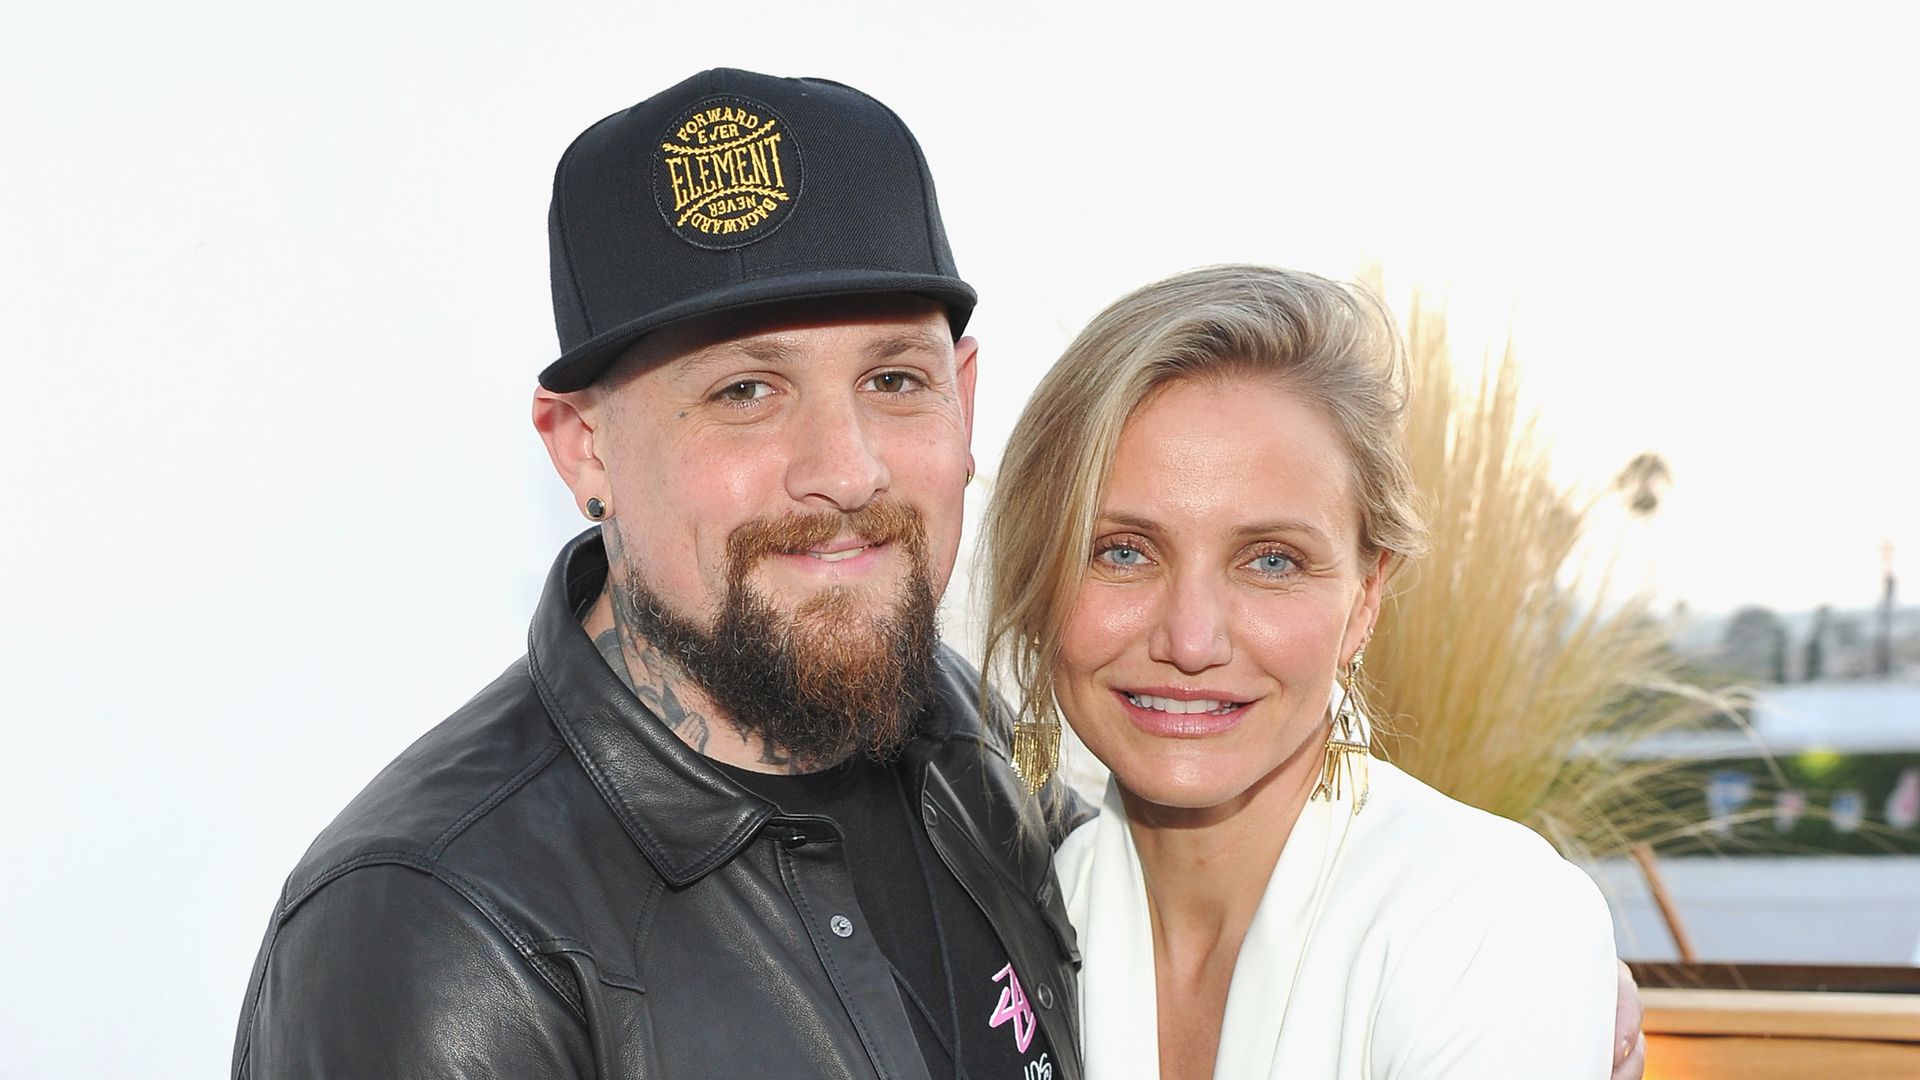 Benji Madden and actress Cameron Diaz attend House of Harlow 1960 x REVOLVE on June 2, 2016 in Los Angeles, California